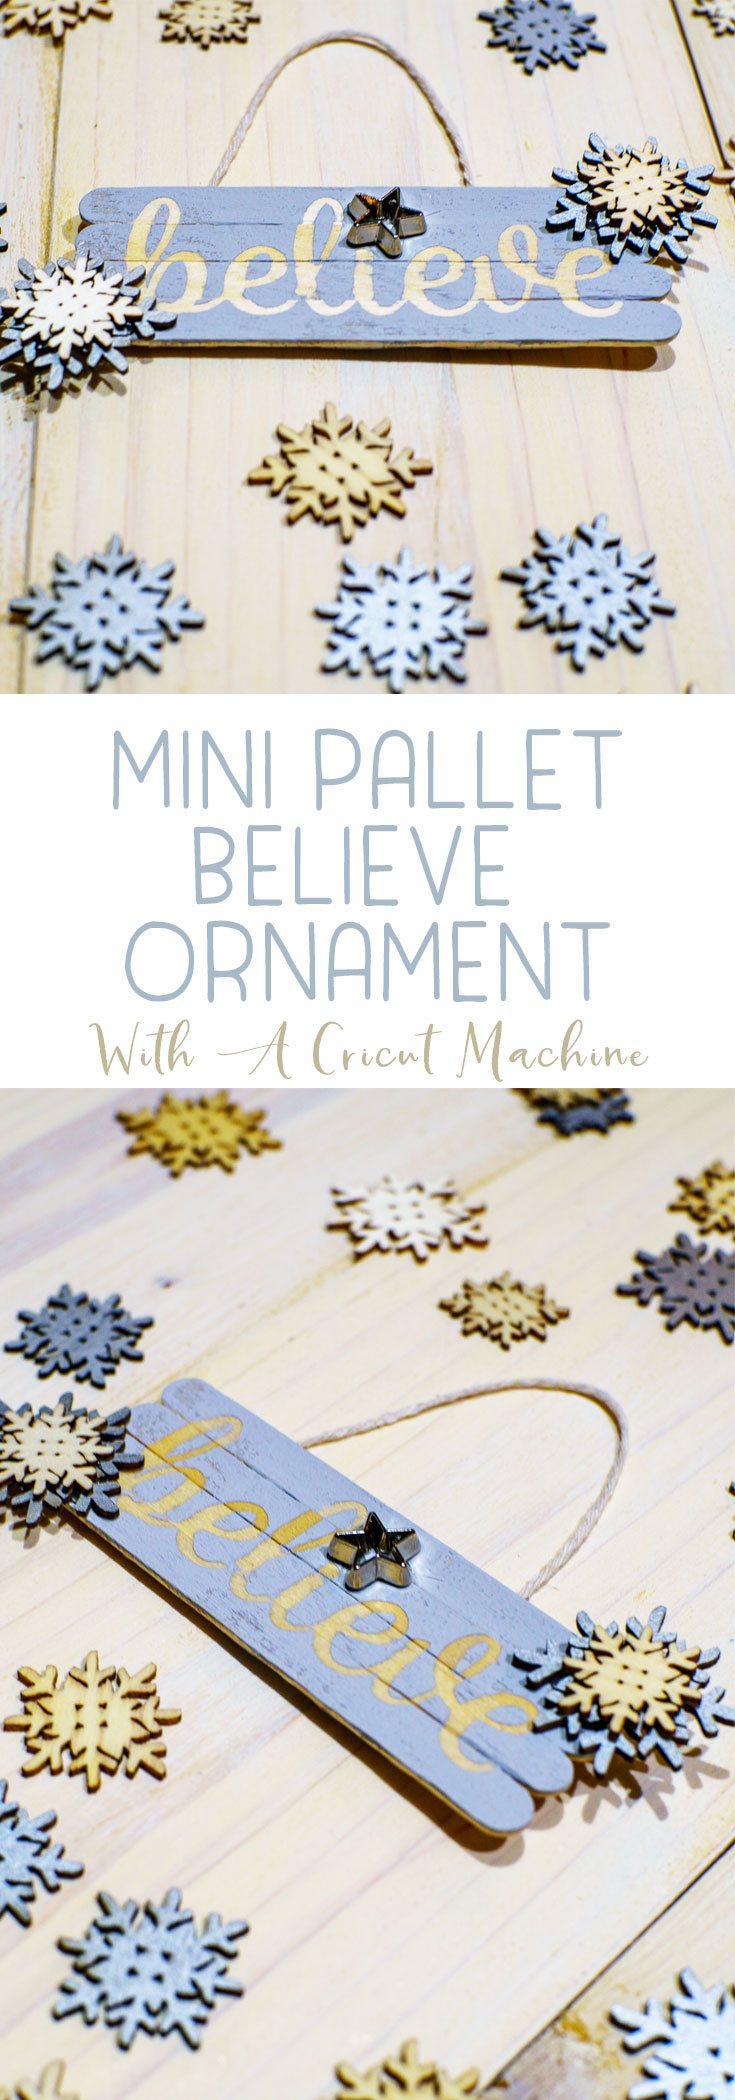 Craft a Believe Ornament that is easy to make with craft sticks and a Cricut Explore Air 2. You'll be amazed how quick they are to make! #cricut #ChristmasOrnament #handmade #FarmhouseChristmas #Believe  via @mrsmajorhoff